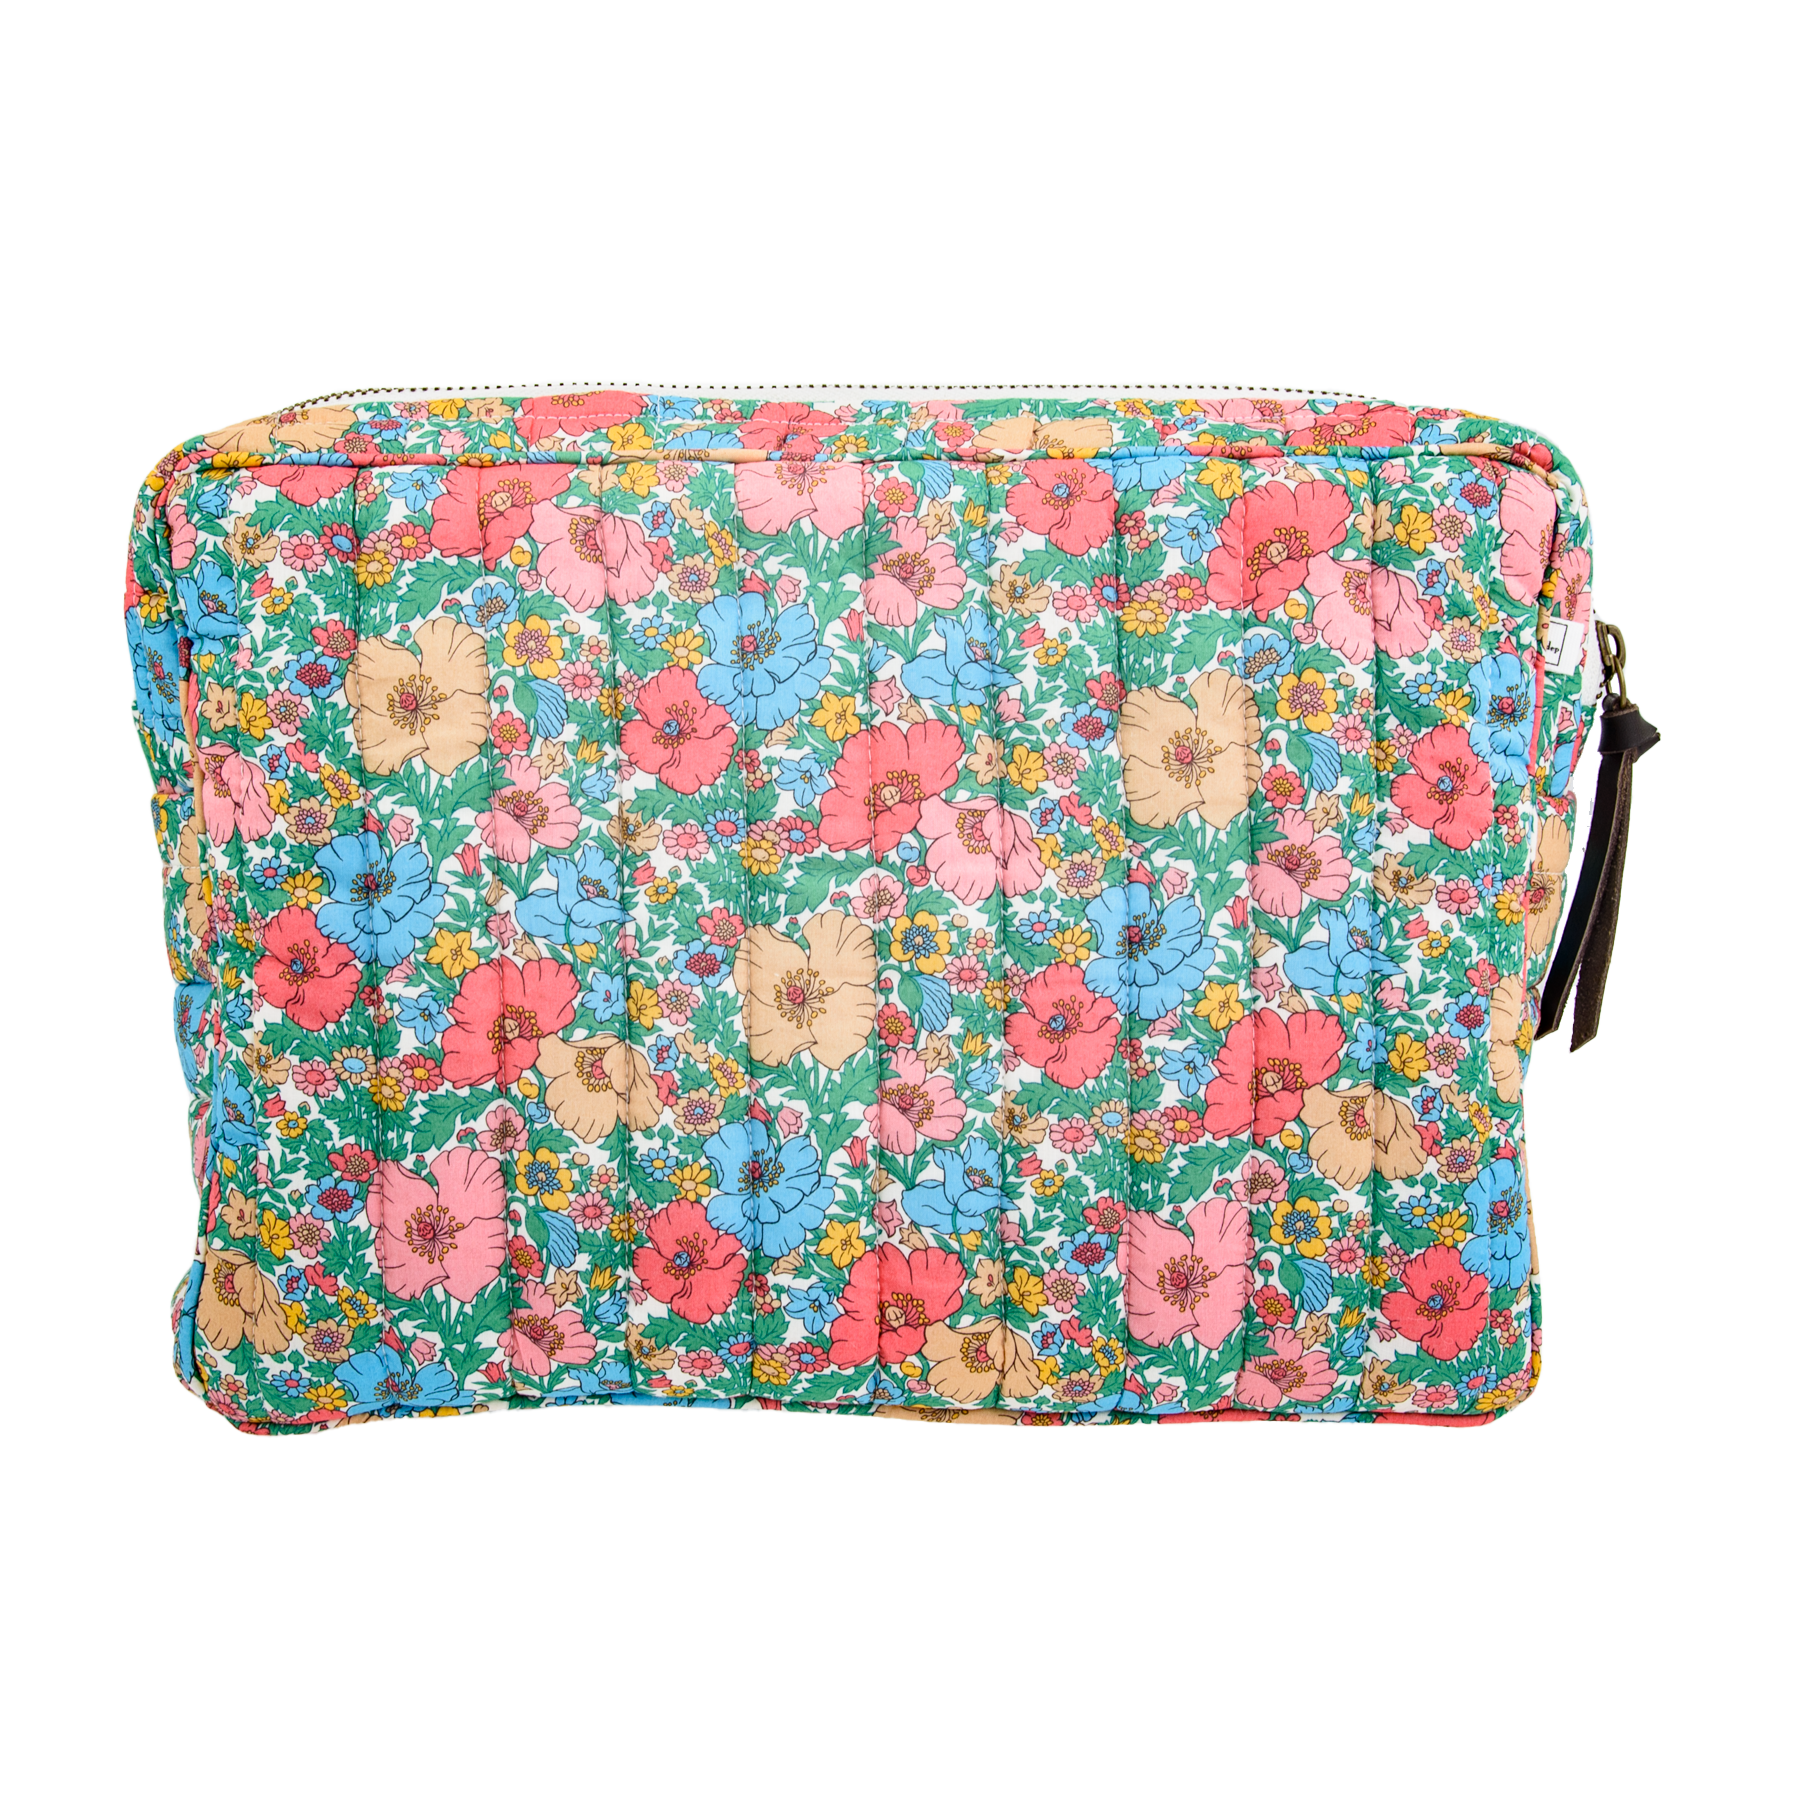 POUCH BIG MW LIBERTY FABRIC MEADOW SONG PEACH